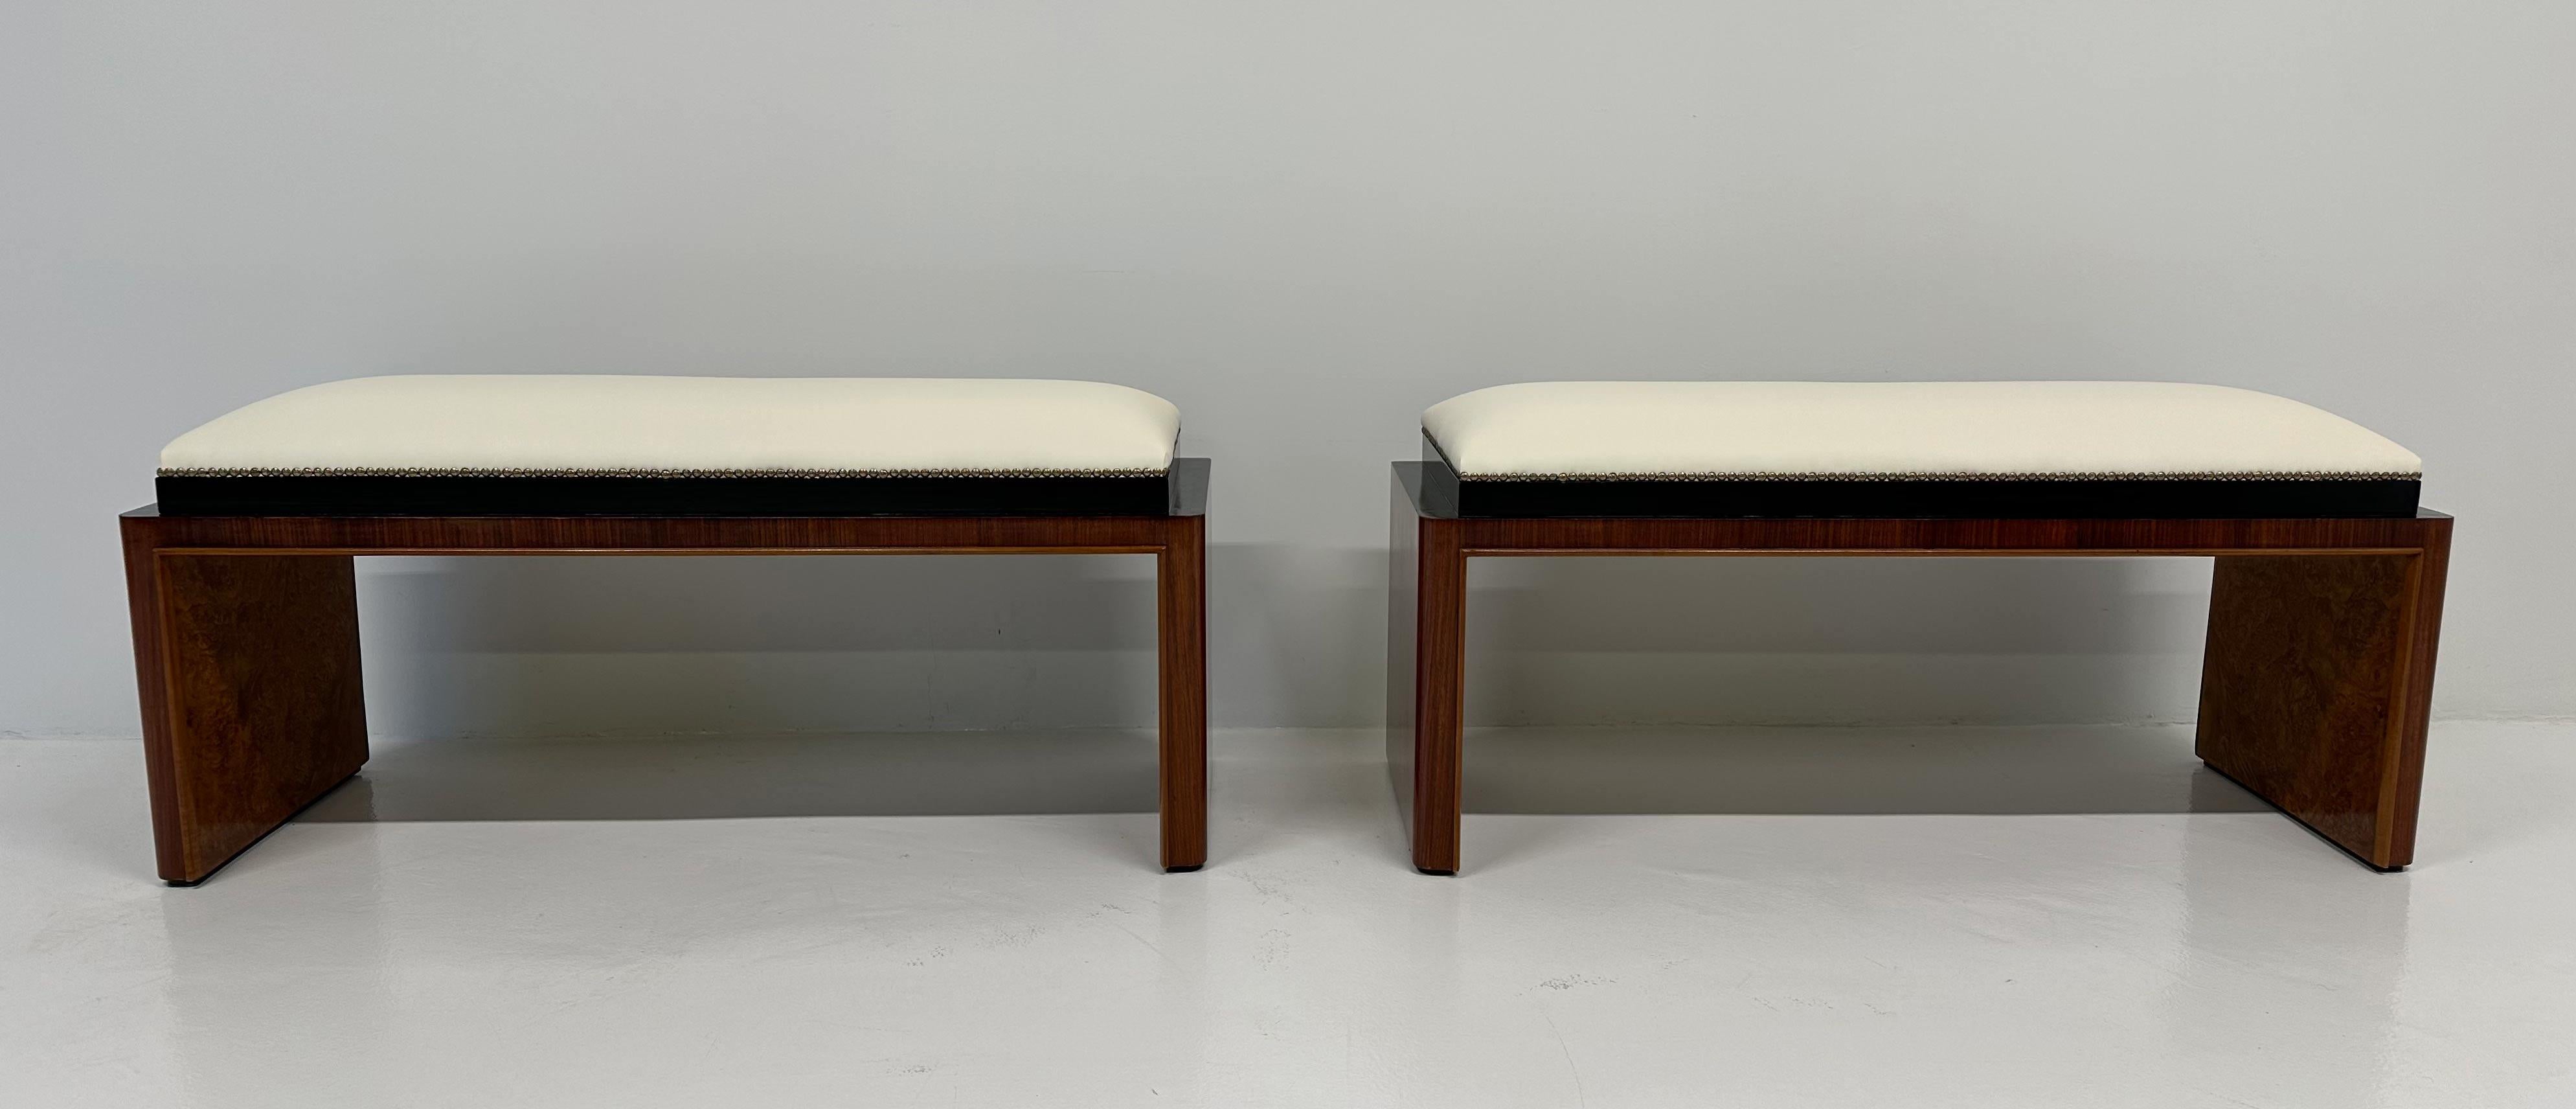 This pair of Art Deco benches was produced in Italy in the 1930s. 
The inside part of the legs is in Thuja Briar, while the outside is in Macassar ebony. The profile of the seat and the reeded back are in black lacquered wood. The seat is in a